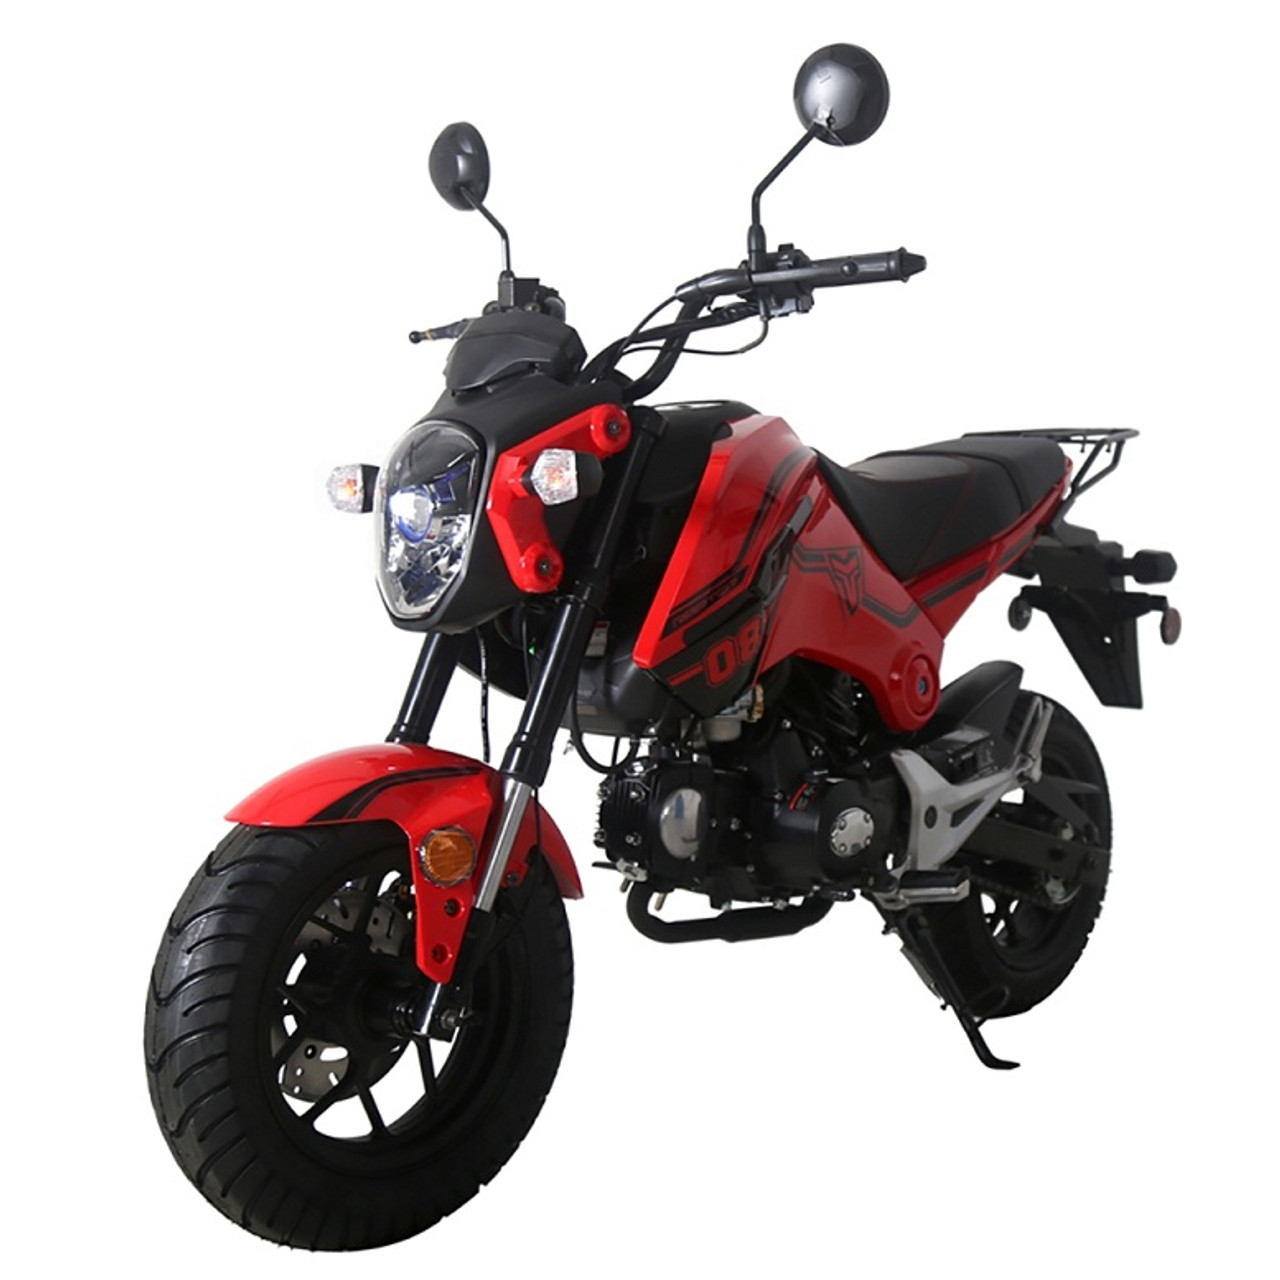 Free shipping! X-PRO 125cc Vader Motorcycle with Manual